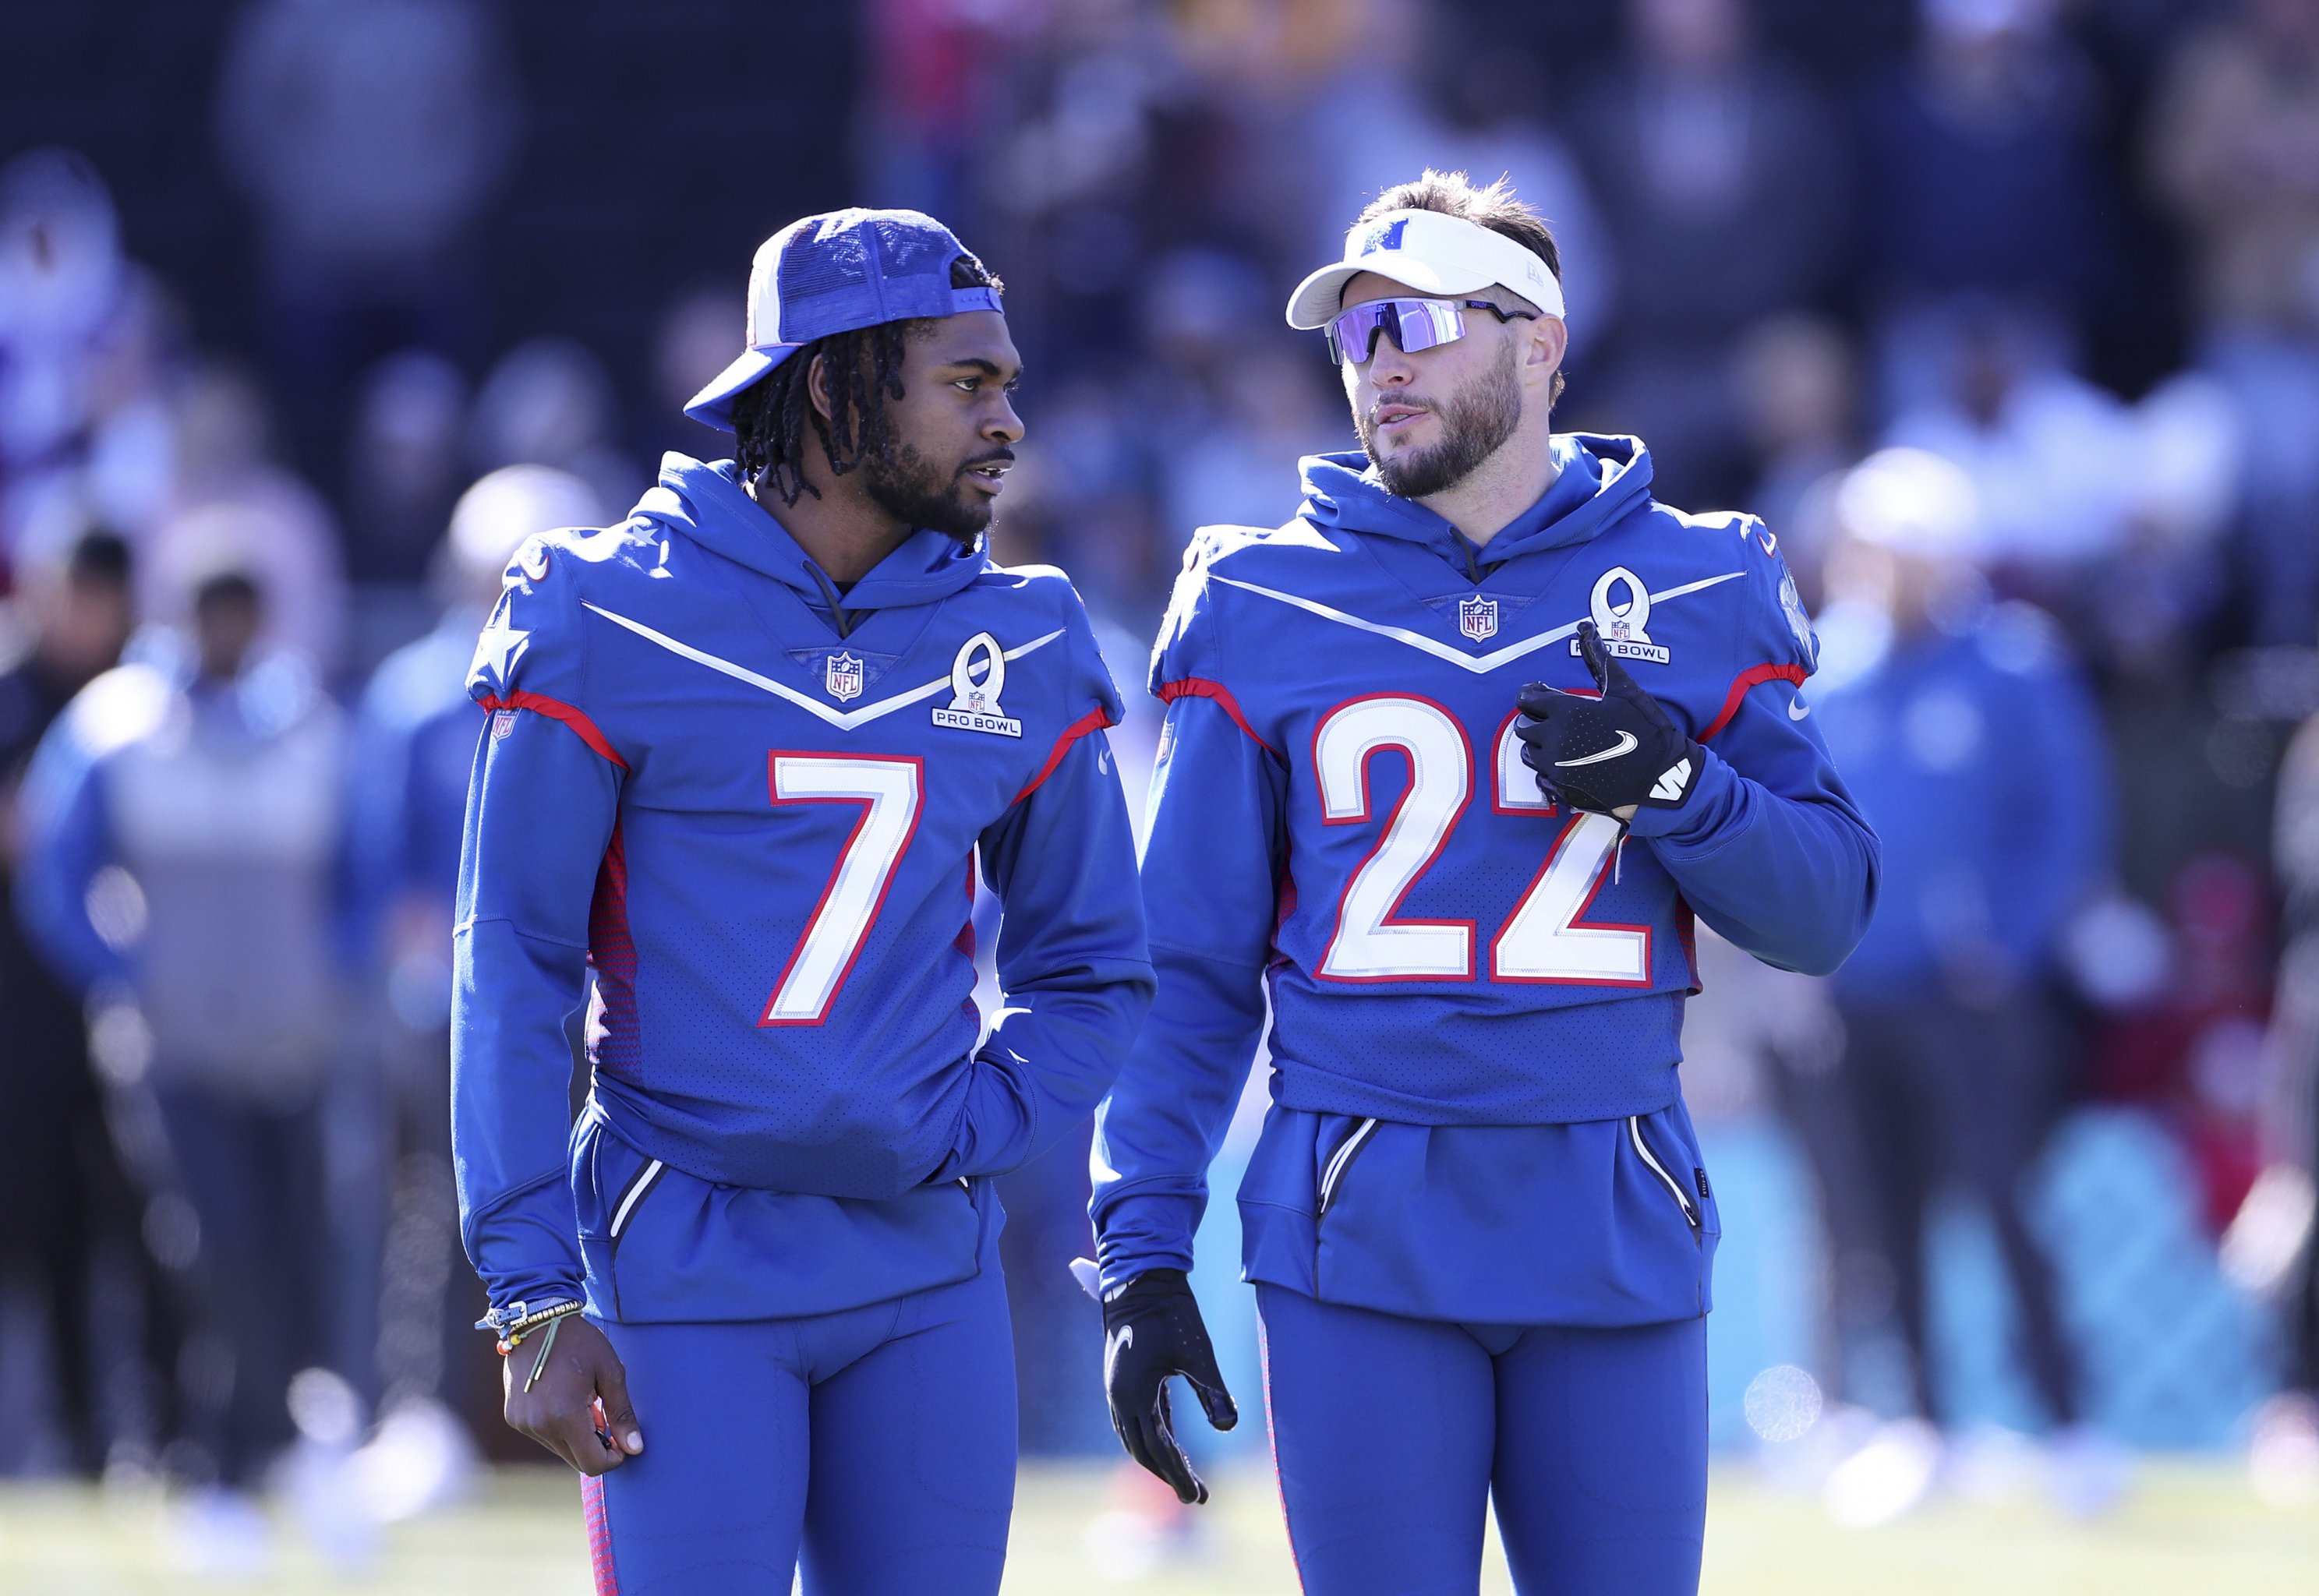 Pro Bowl 2022: AFC vs. NFC Rosters and Players to Watch